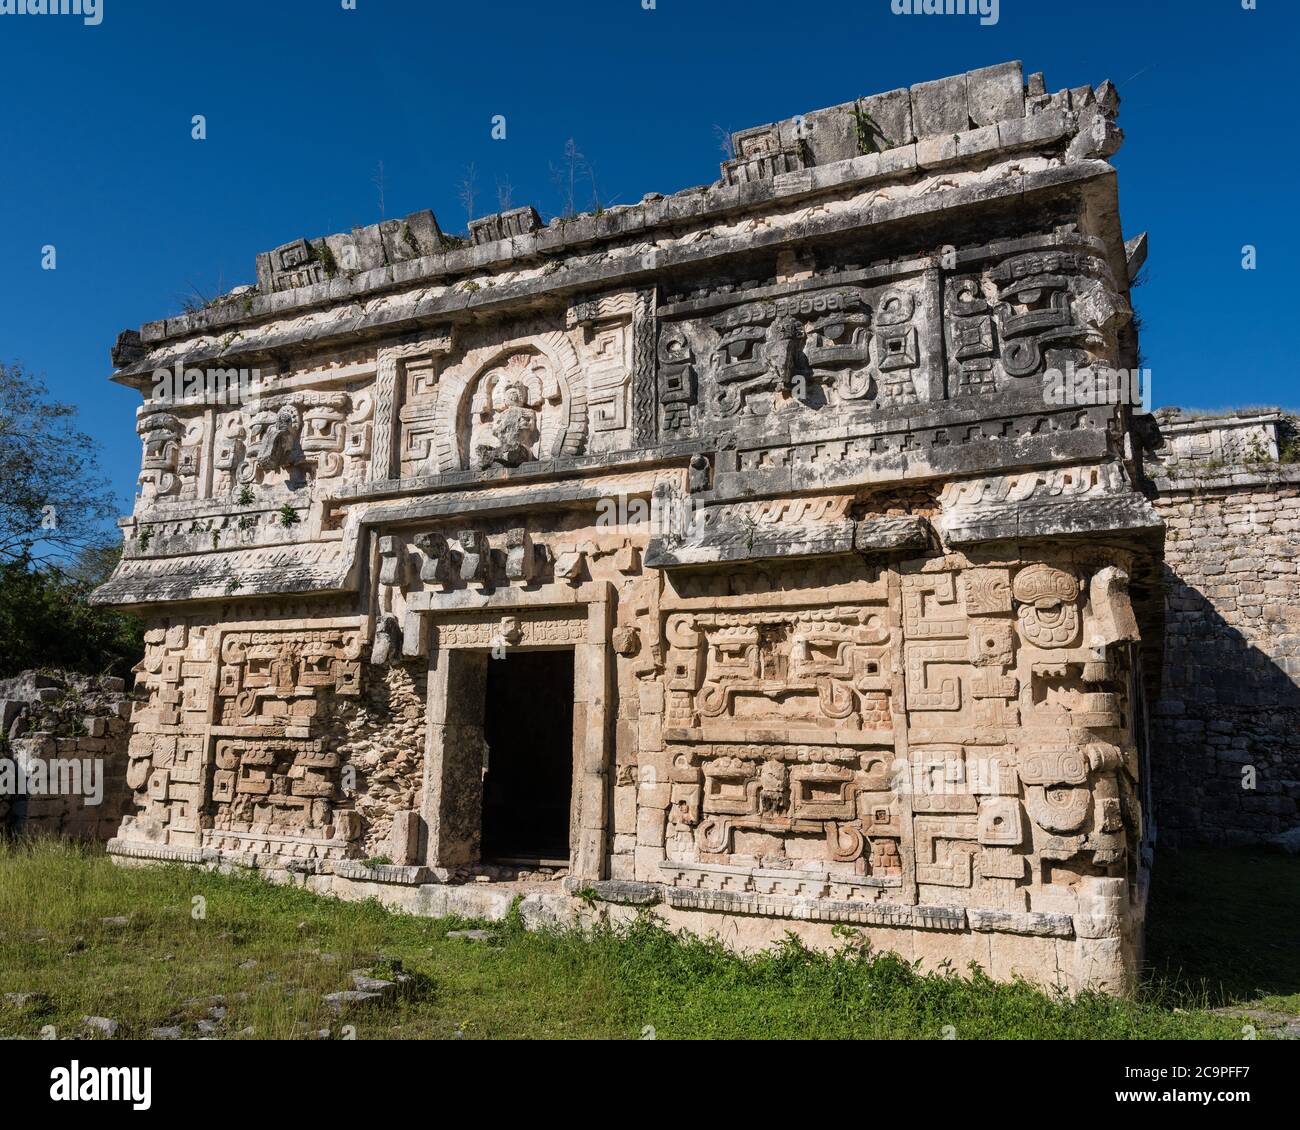 The ornately-carved Chenes-style facade of the entrance to the Nunnery Complex in the ruins of the great Mayan city of Chichen Itza, Yucatan, Mexico. Stock Photo